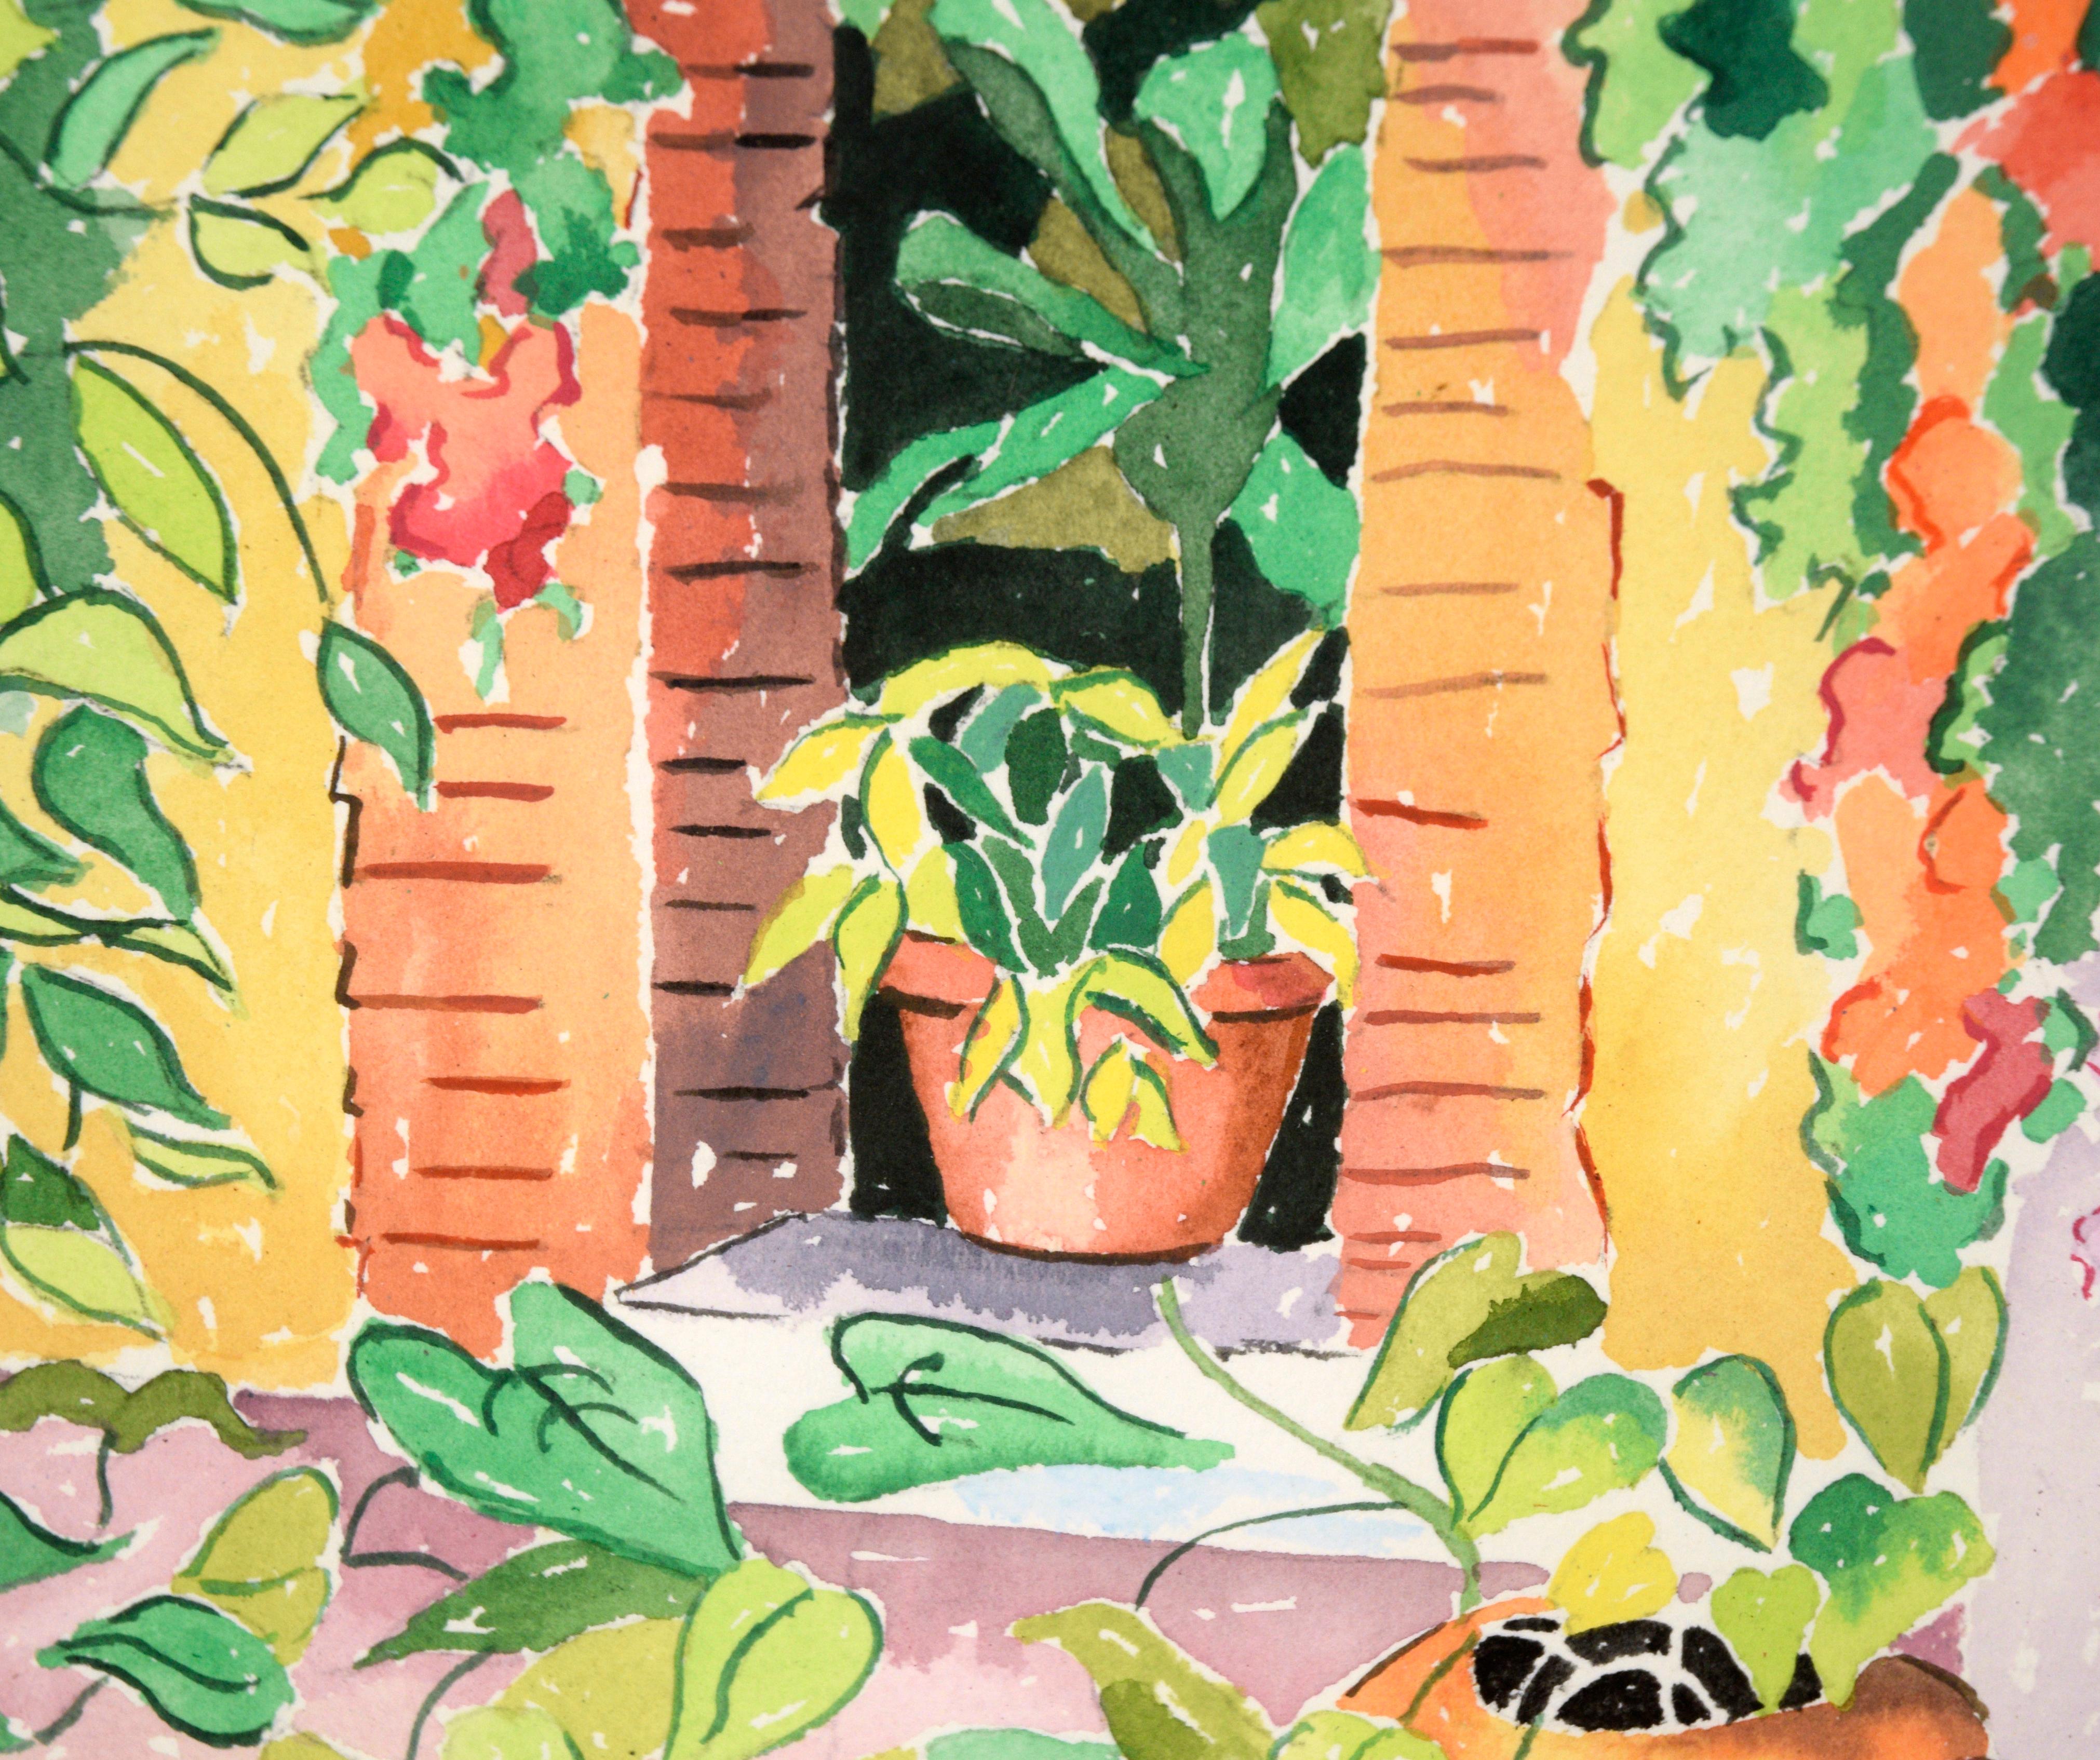 Bright floral landscape by Jean Harney (American, 20th Century). An interior courtyard is full of plants and flowers in bloom. There is a lush vine climbing over an archway, with blossoms in shades of pink and orange. Several other potted plants are